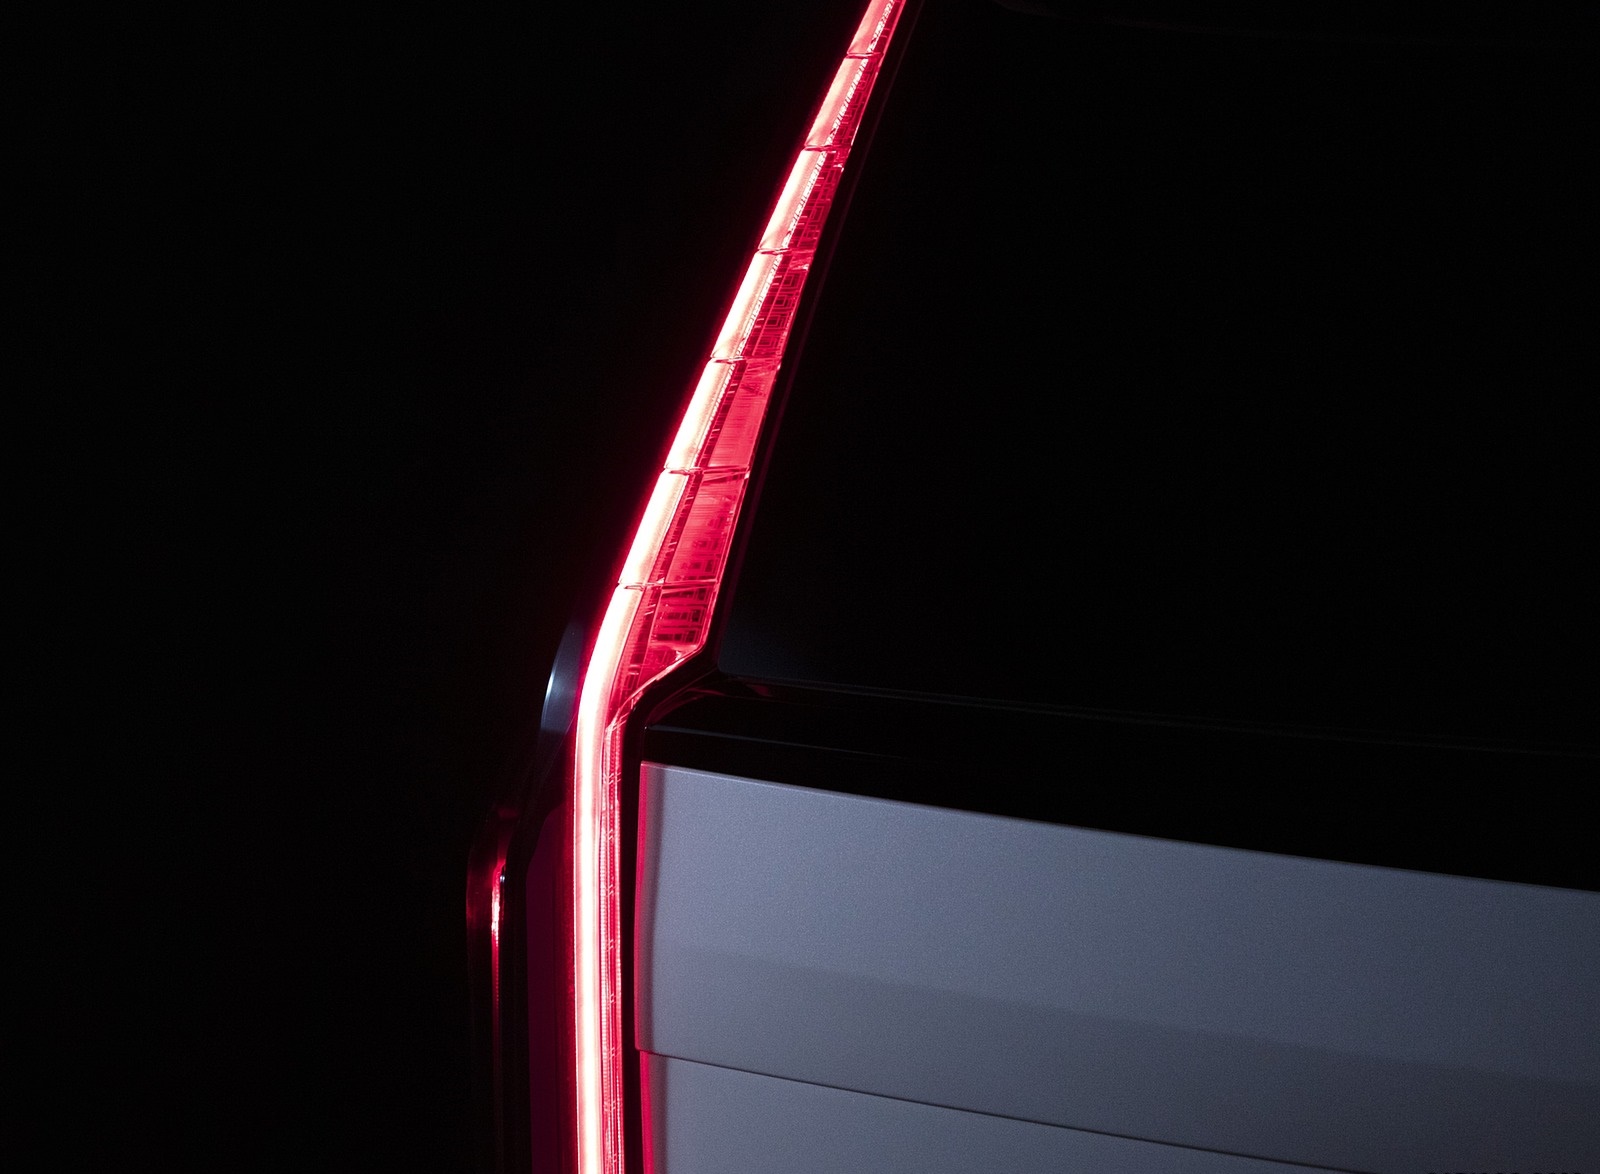 2021 Cadillac Escalade Tail Light Wallpapers #21 of 100